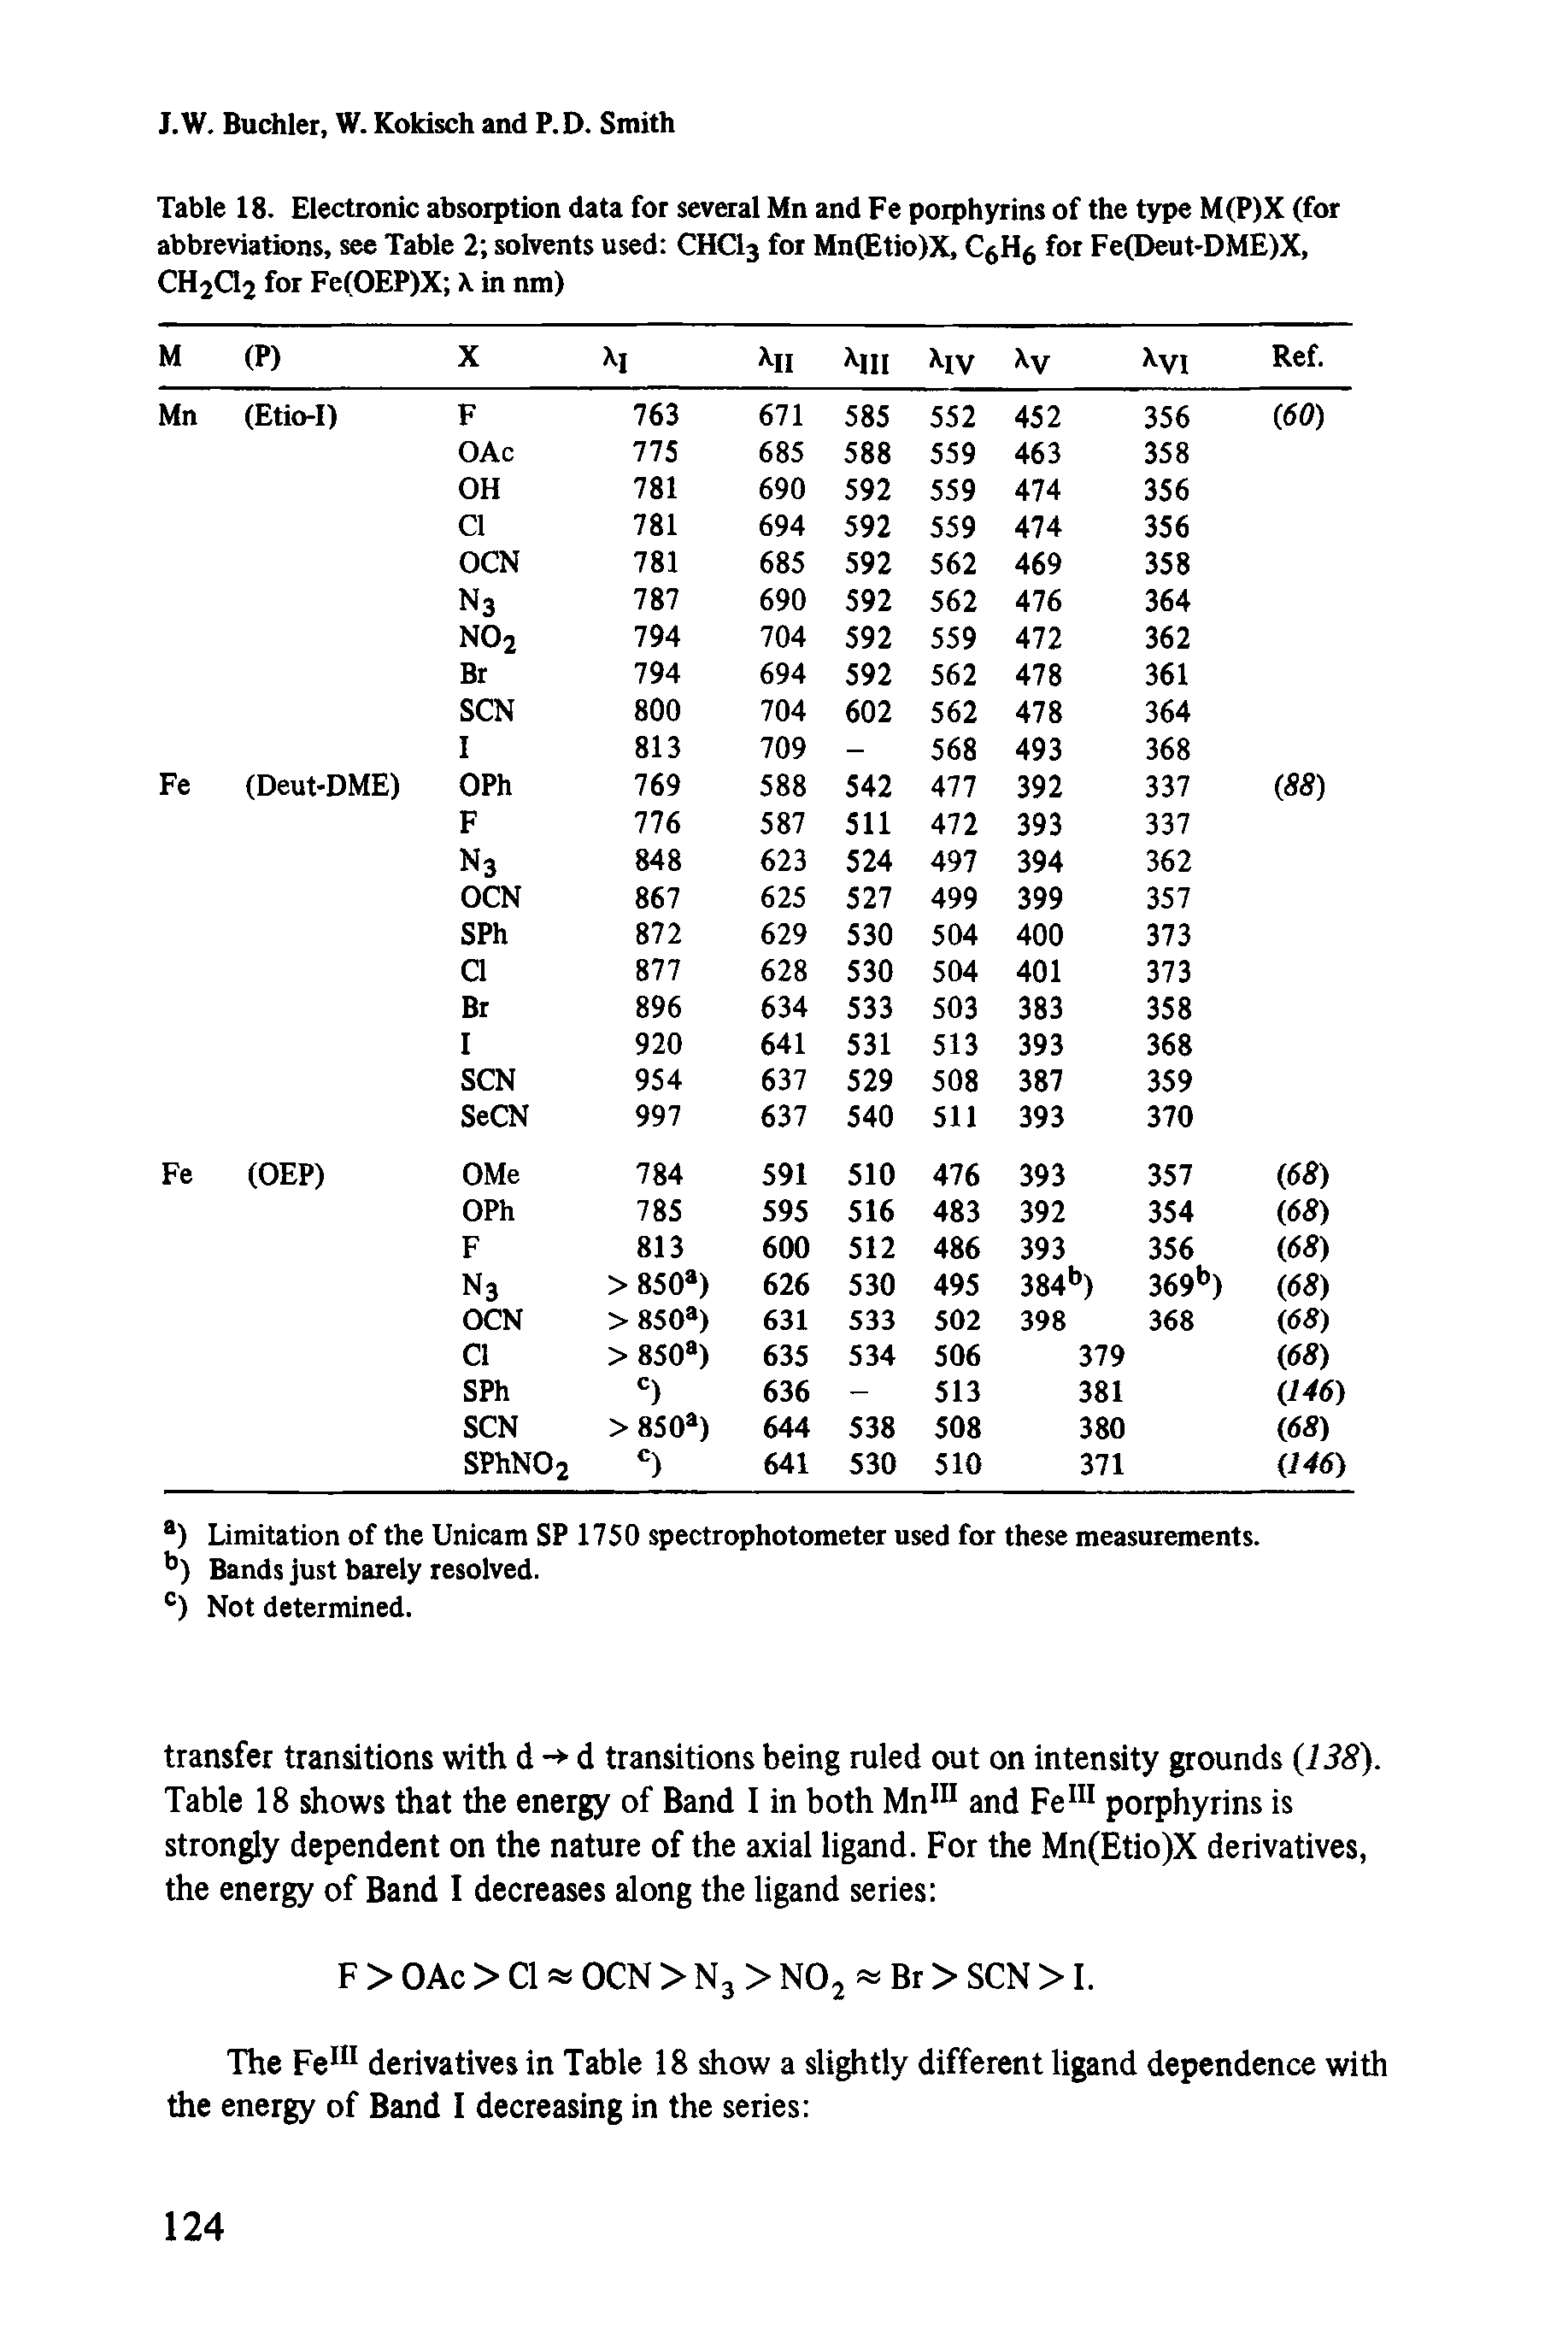 Table 18. Electronic absorption data for several Mn and Fe porphyrins of the type M(P)X (for abbreviations, see Table 2 solvents used CHCI3 for Mn(Etio)X, CgHg for Fe(Deut-DME)X, CHjClj for Fe(OEP)X X in nm)...